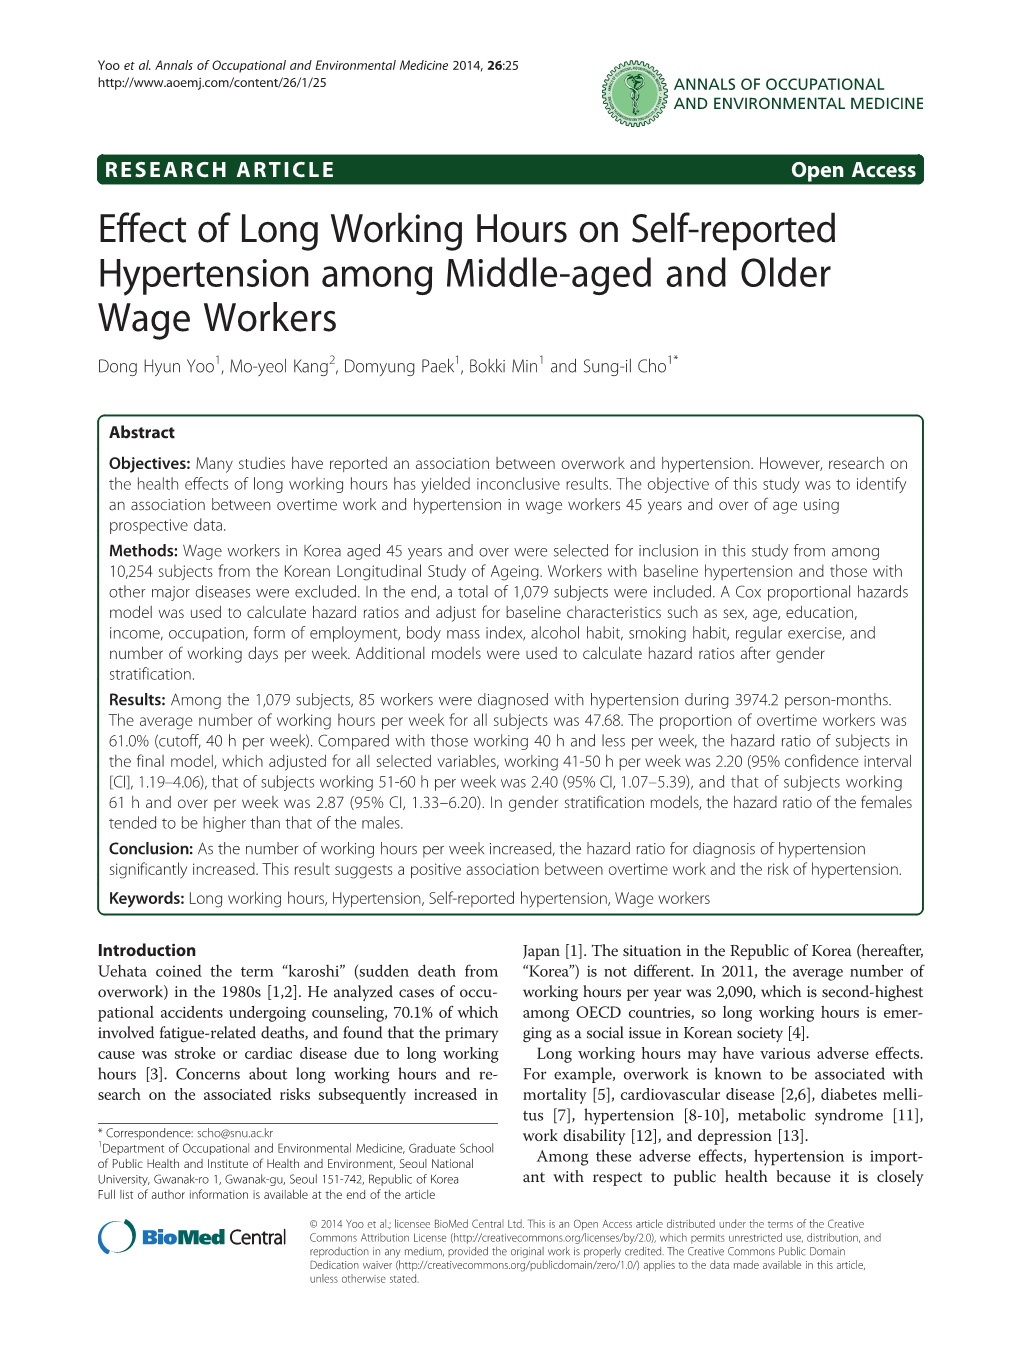 Effect of Long Working Hours on Self-Reported Hypertension Among